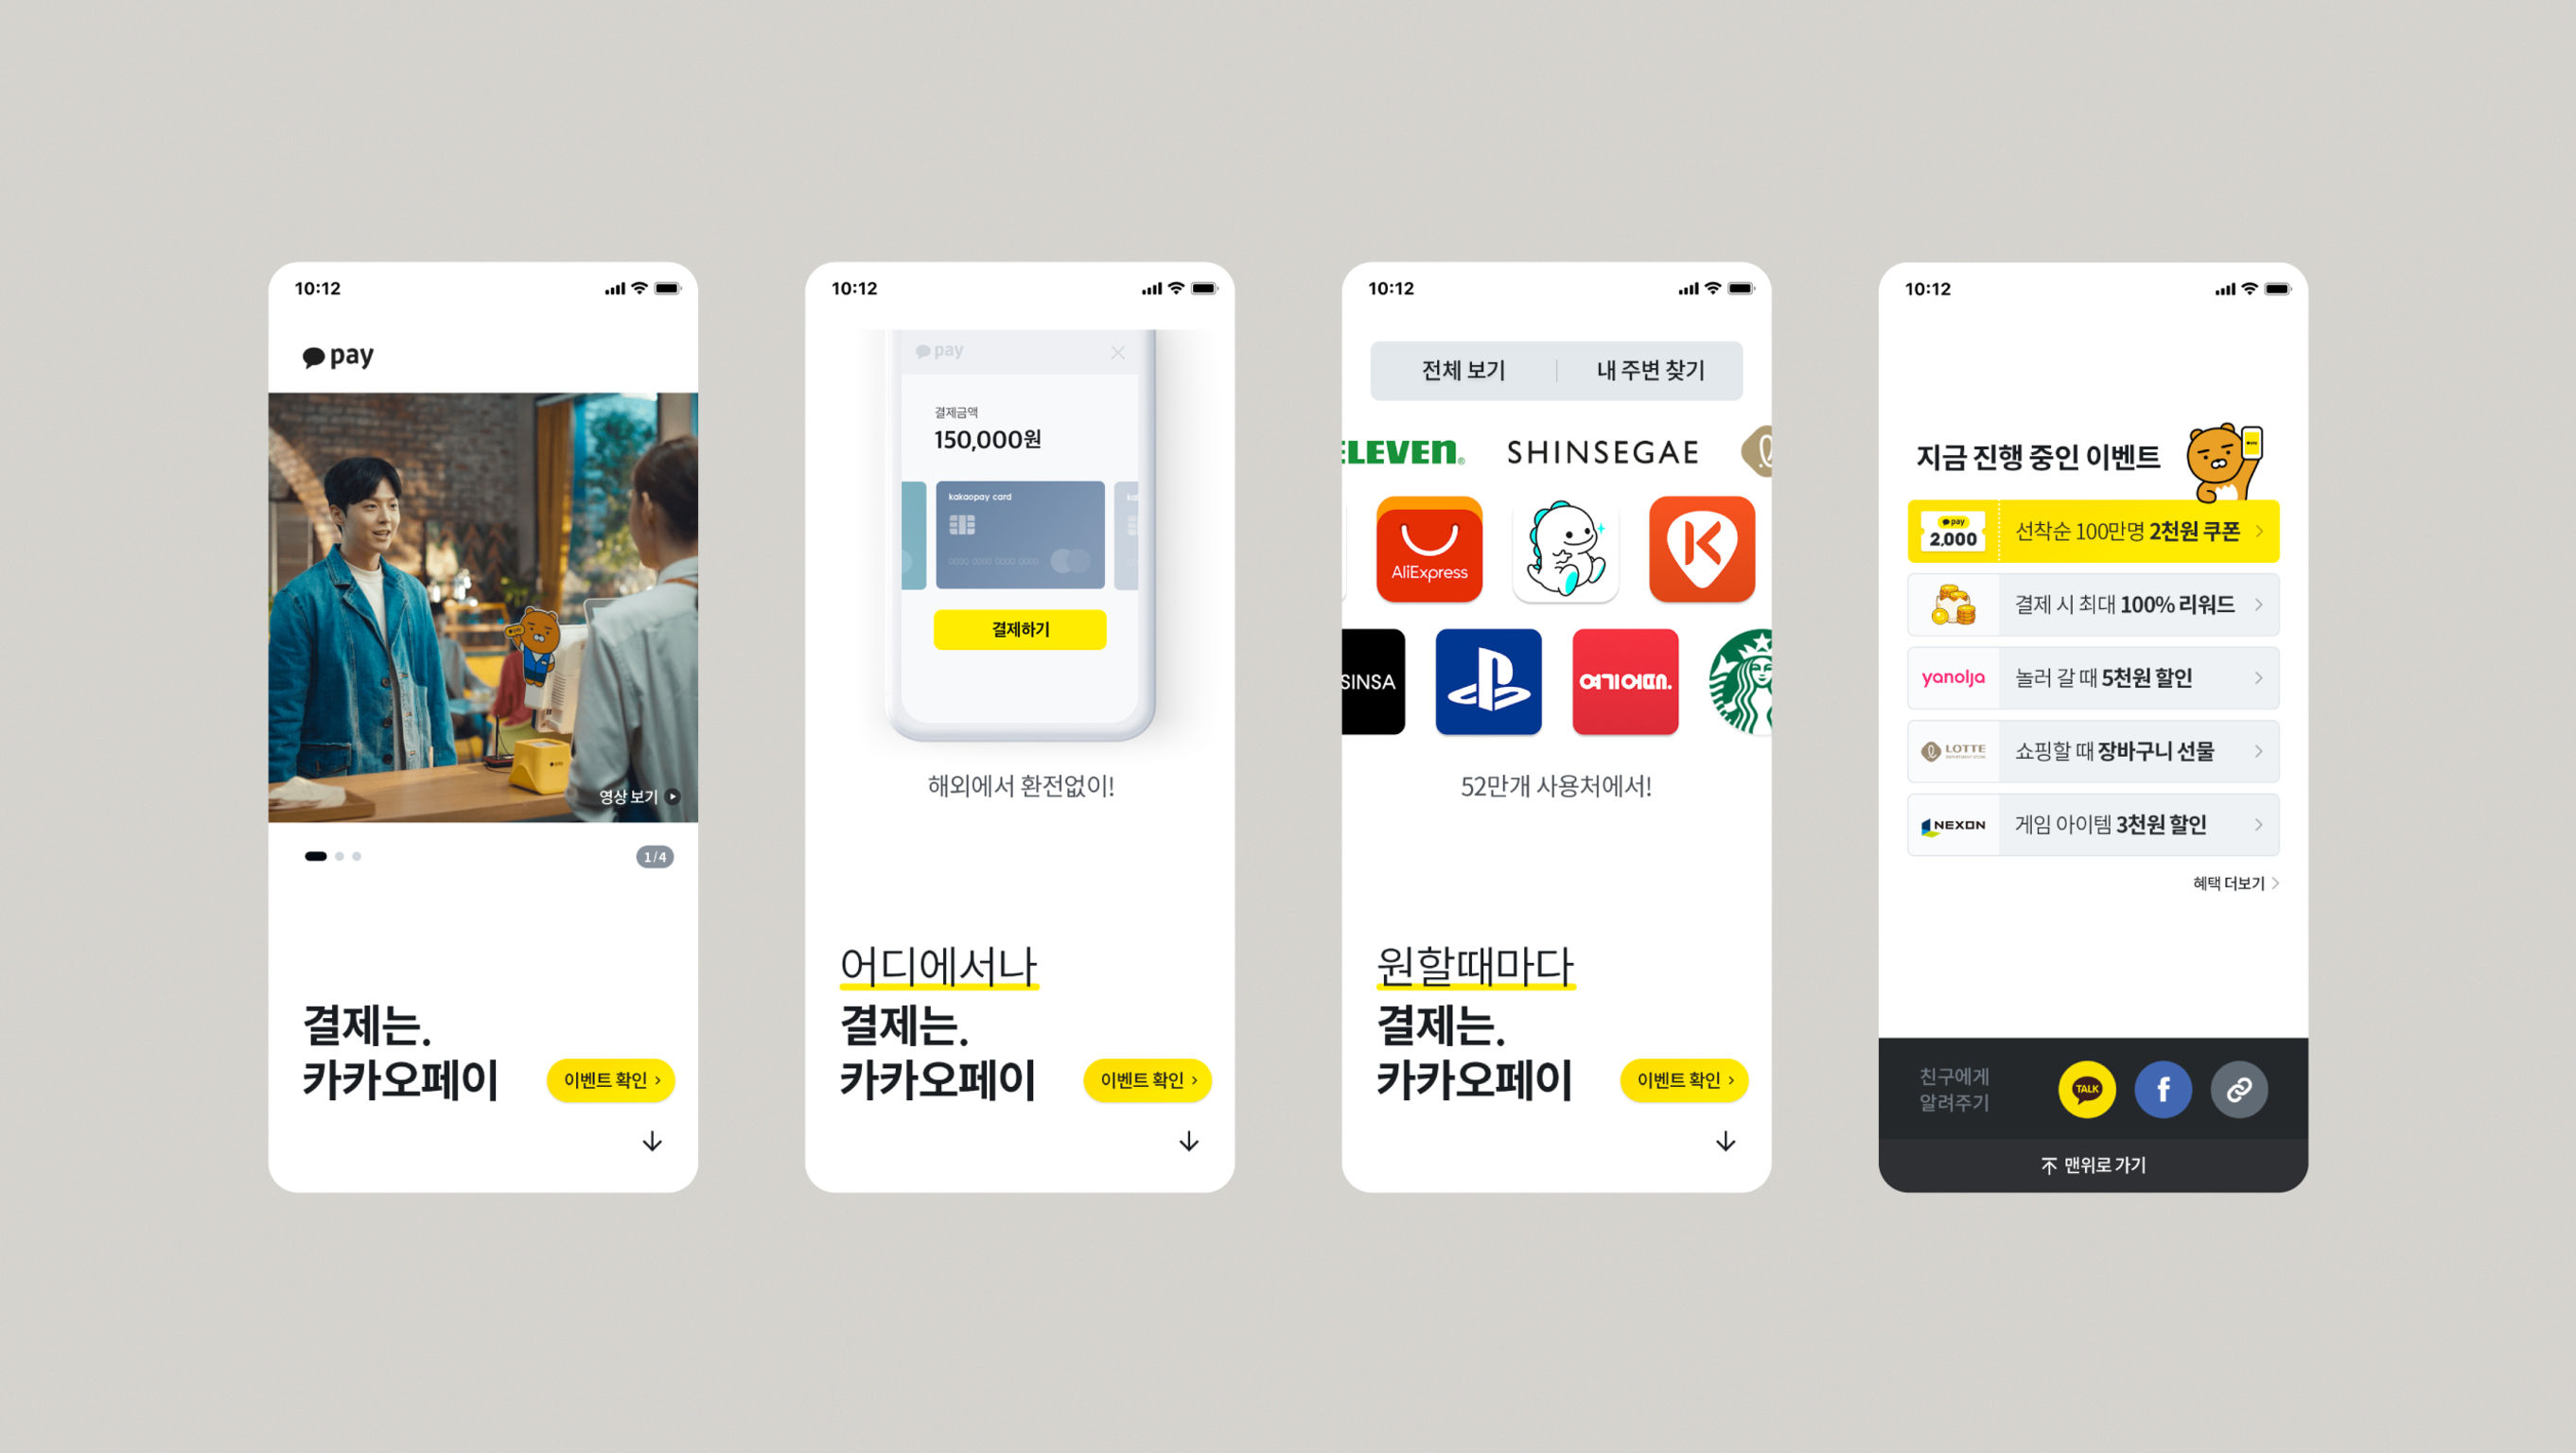 Payment=Kakao Pay